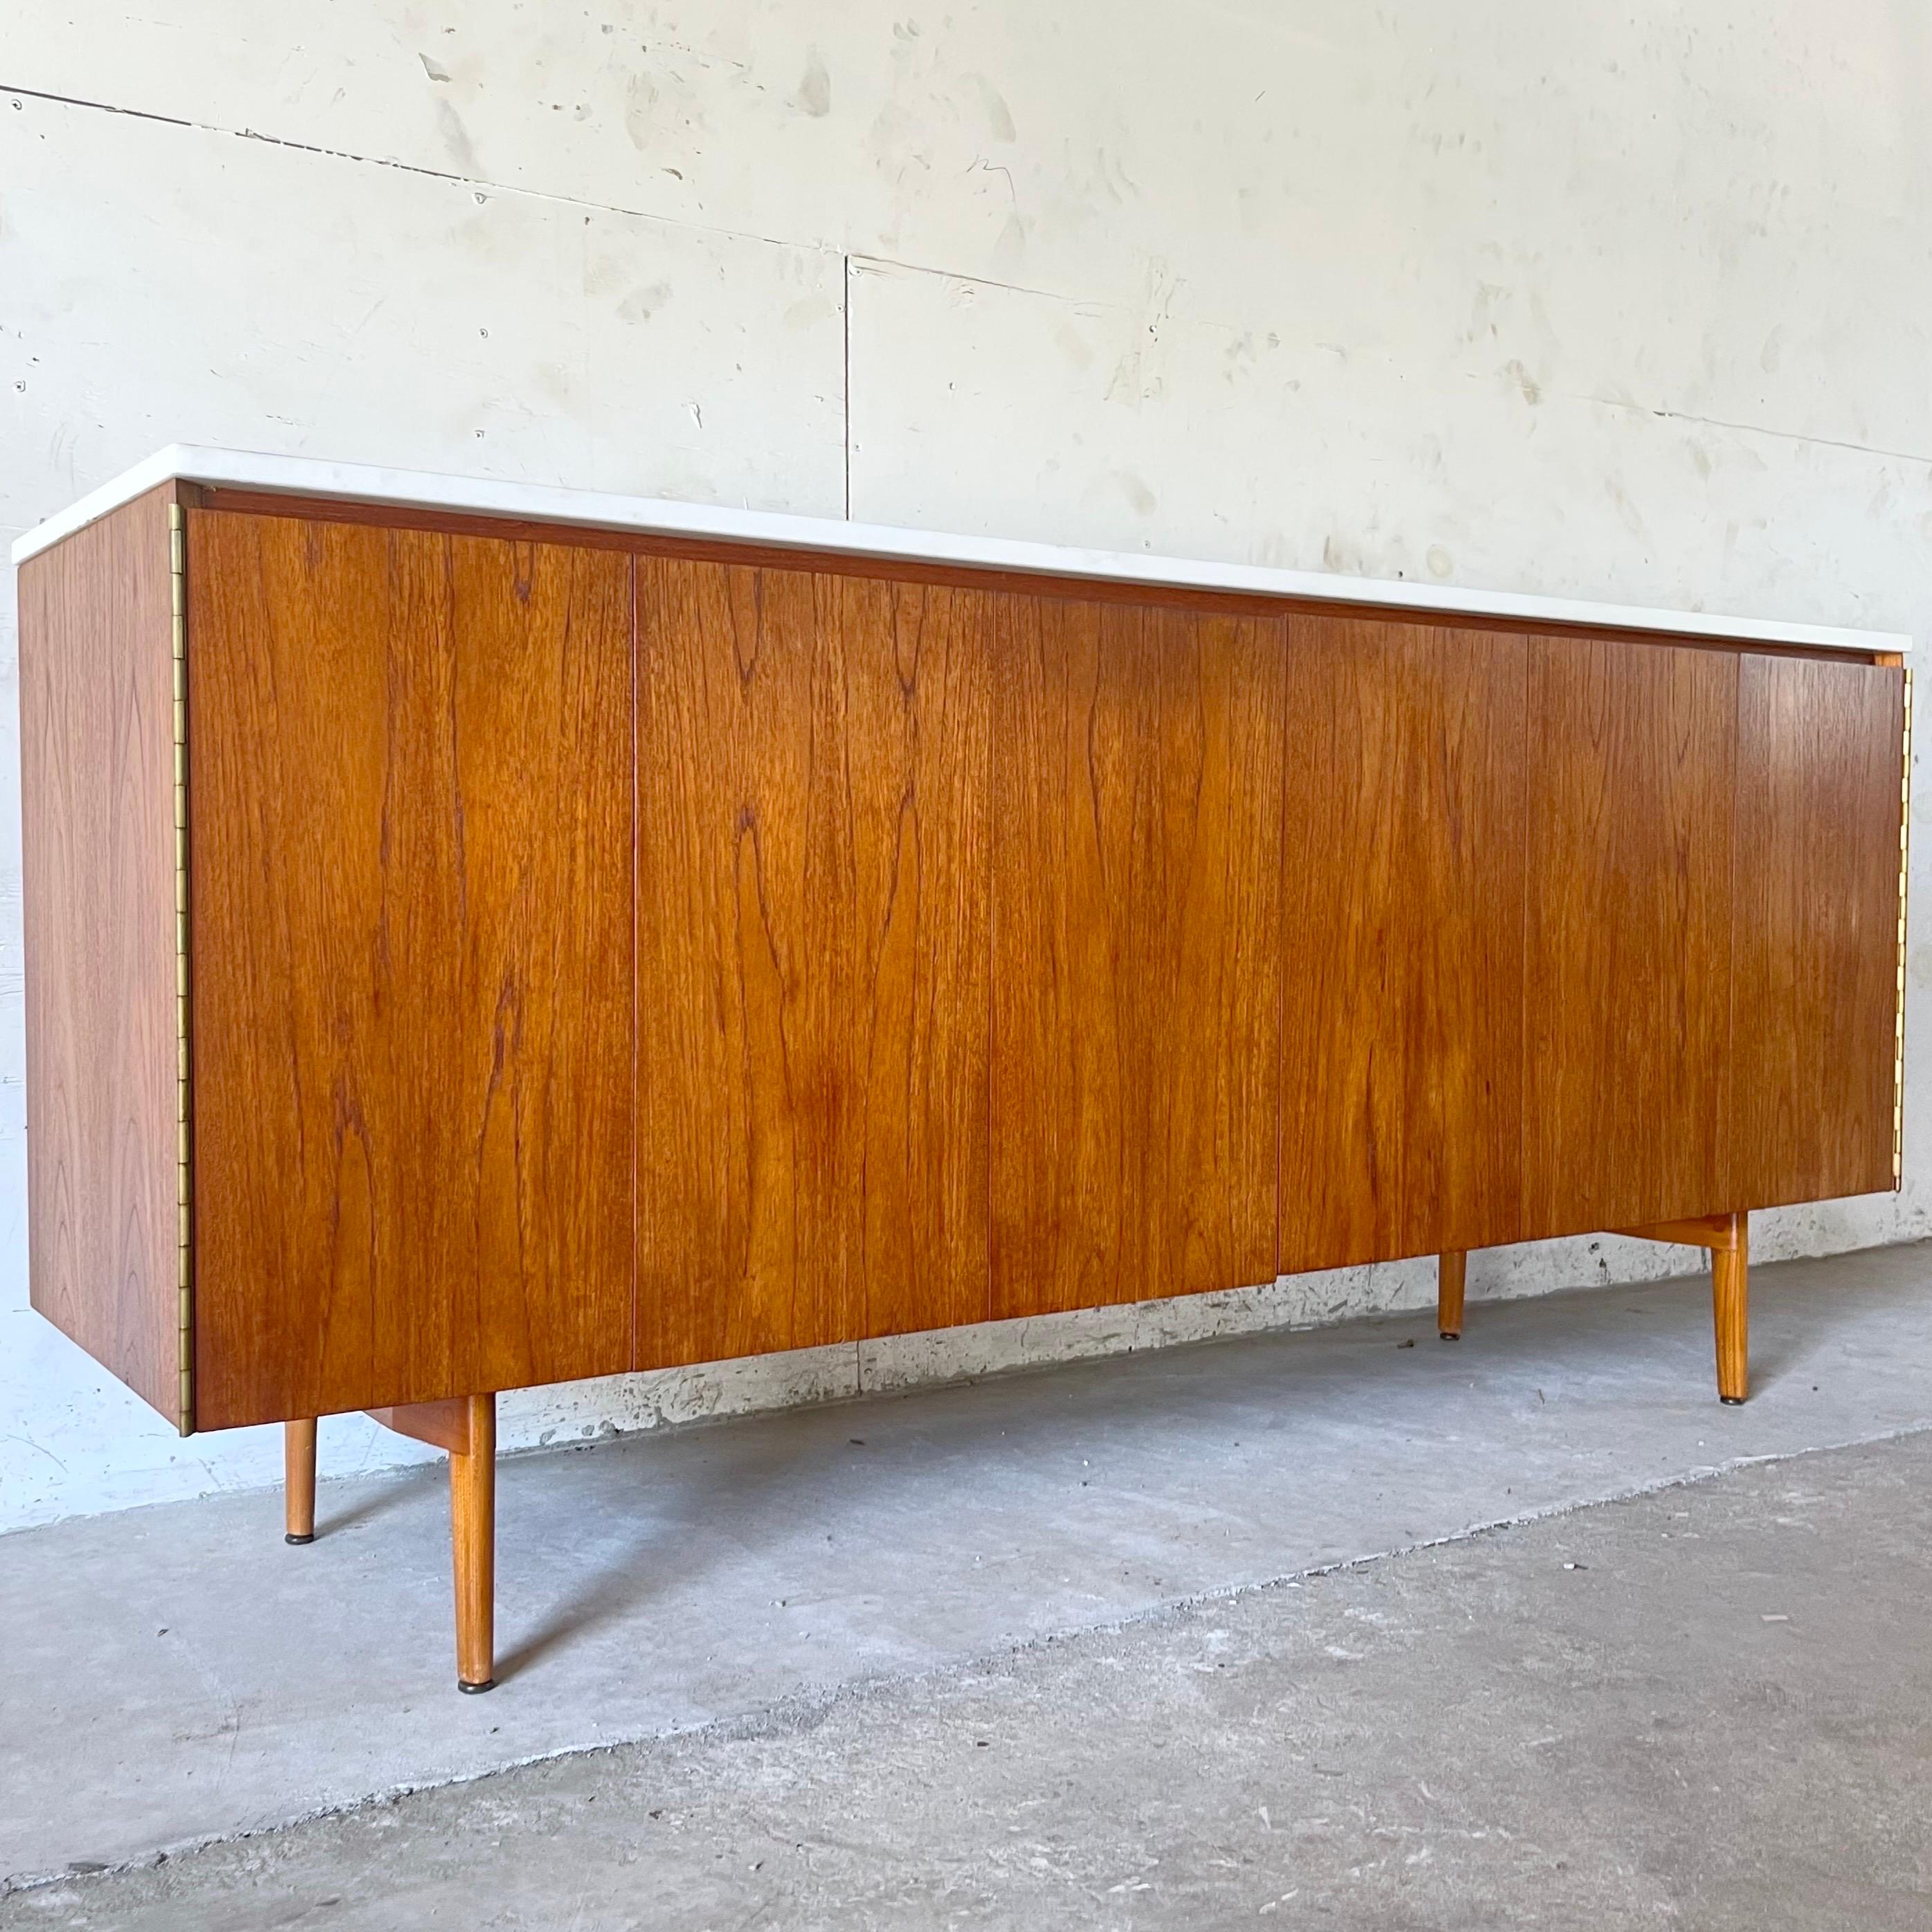 This impressive mid-century modern sideboard by Paul McCobb for Directional Furnitures Calvin Group features trifold doors that conceal spacious interior cabinets with a mix of adjustable shelf space and upper drawers. Ideal mix of storage options